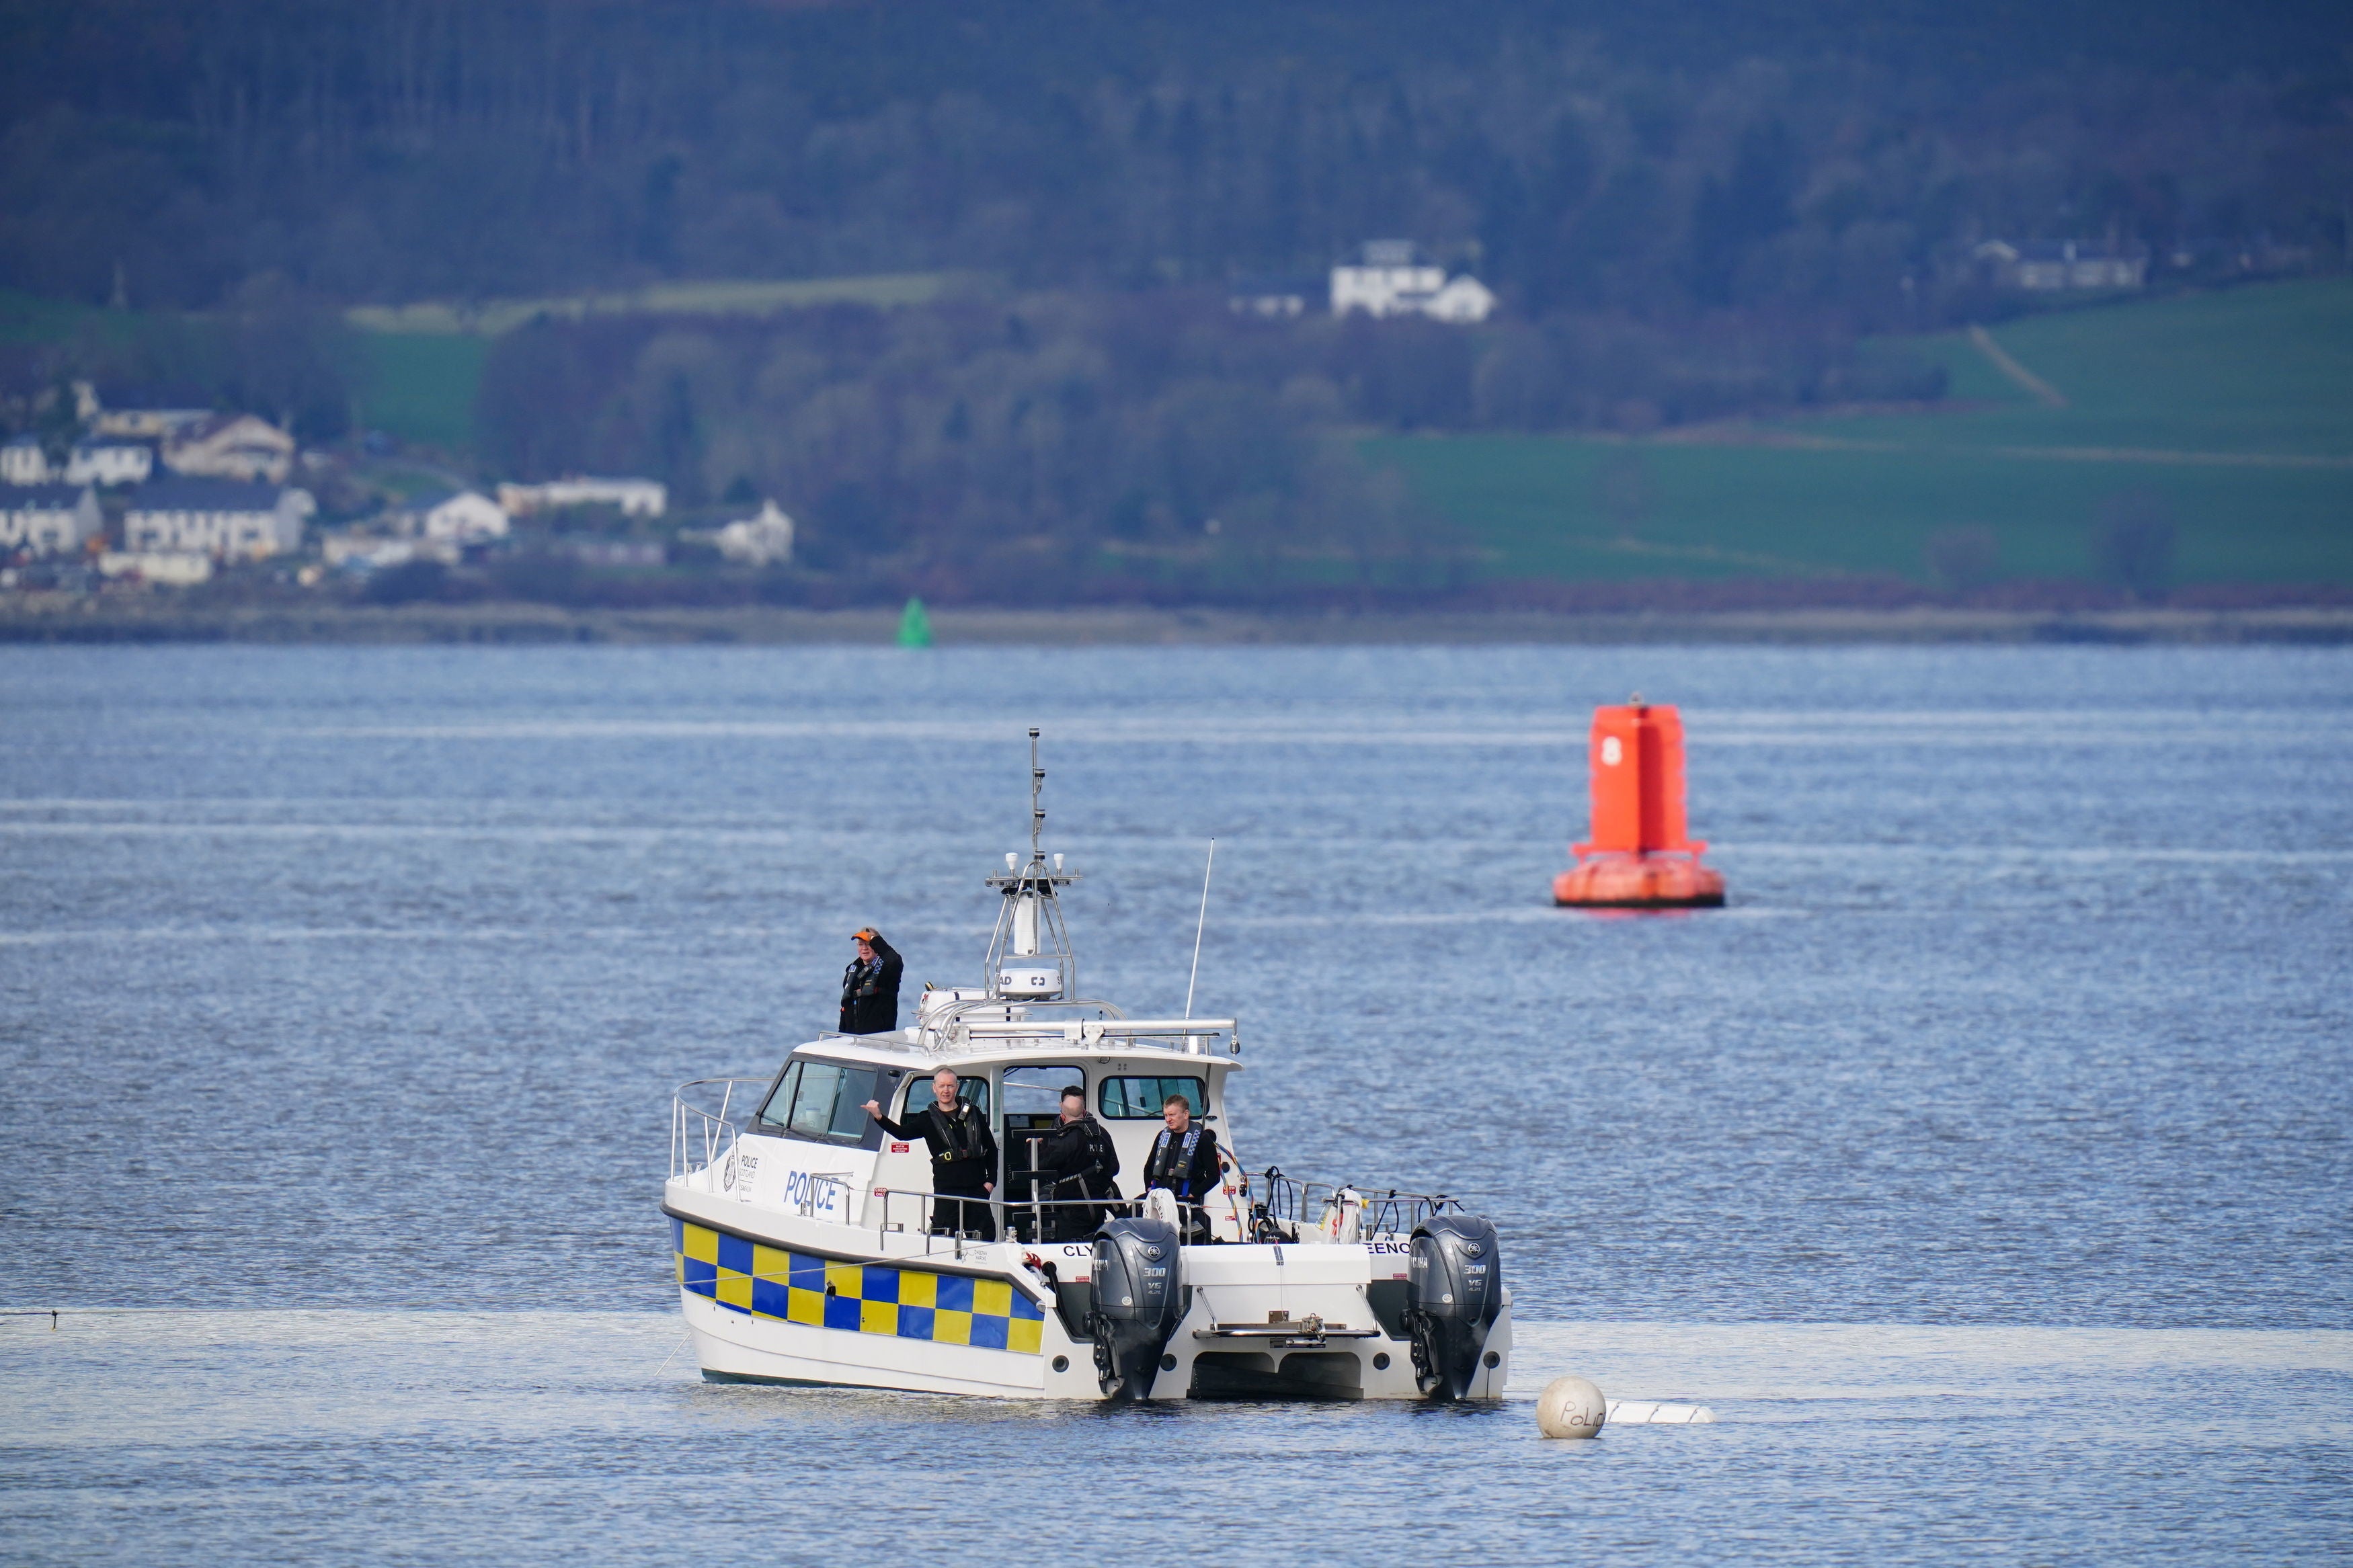 Two people were understood to have been on the boat when it capsized